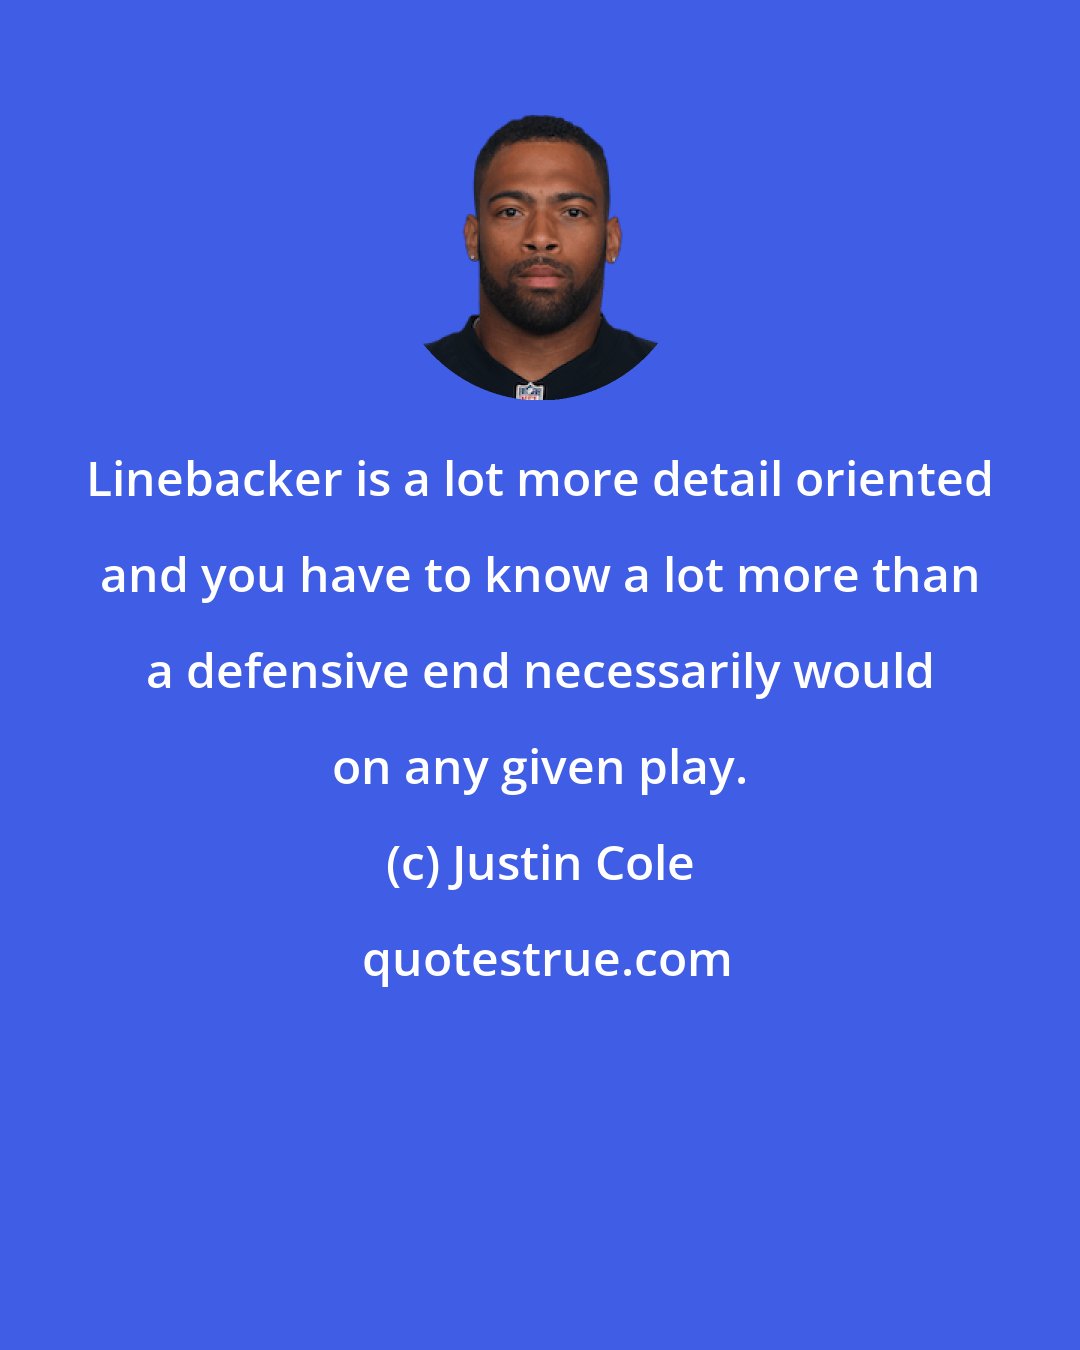 Justin Cole: Linebacker is a lot more detail oriented and you have to know a lot more than a defensive end necessarily would on any given play.